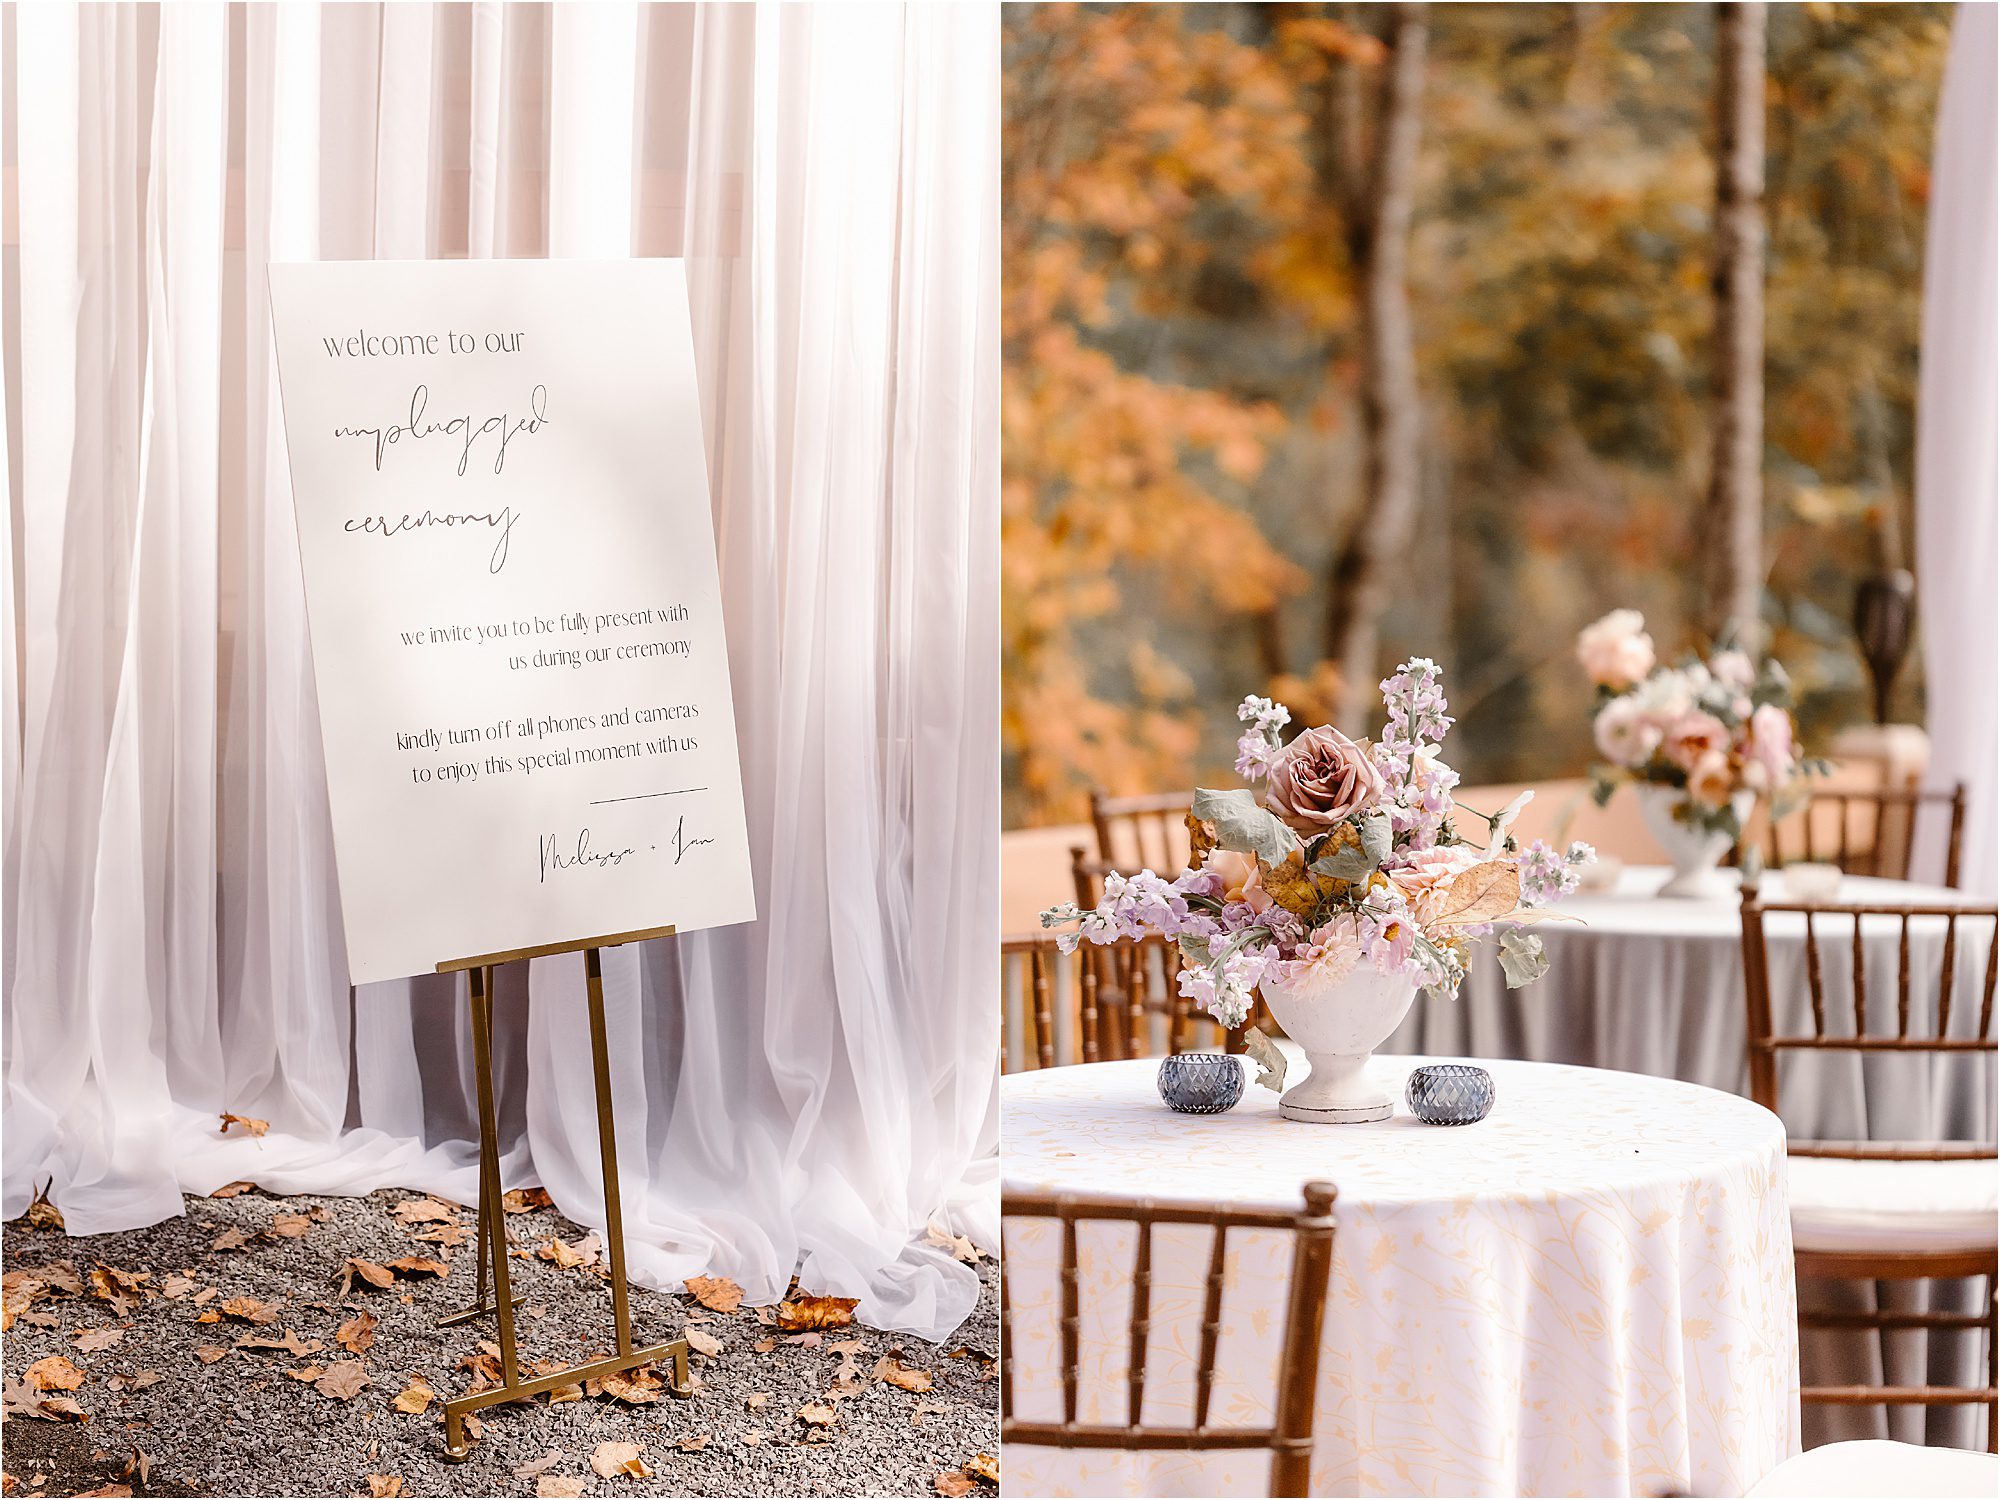 wedding sign in front of while fabric and reception floral centerpieces on high-top tables